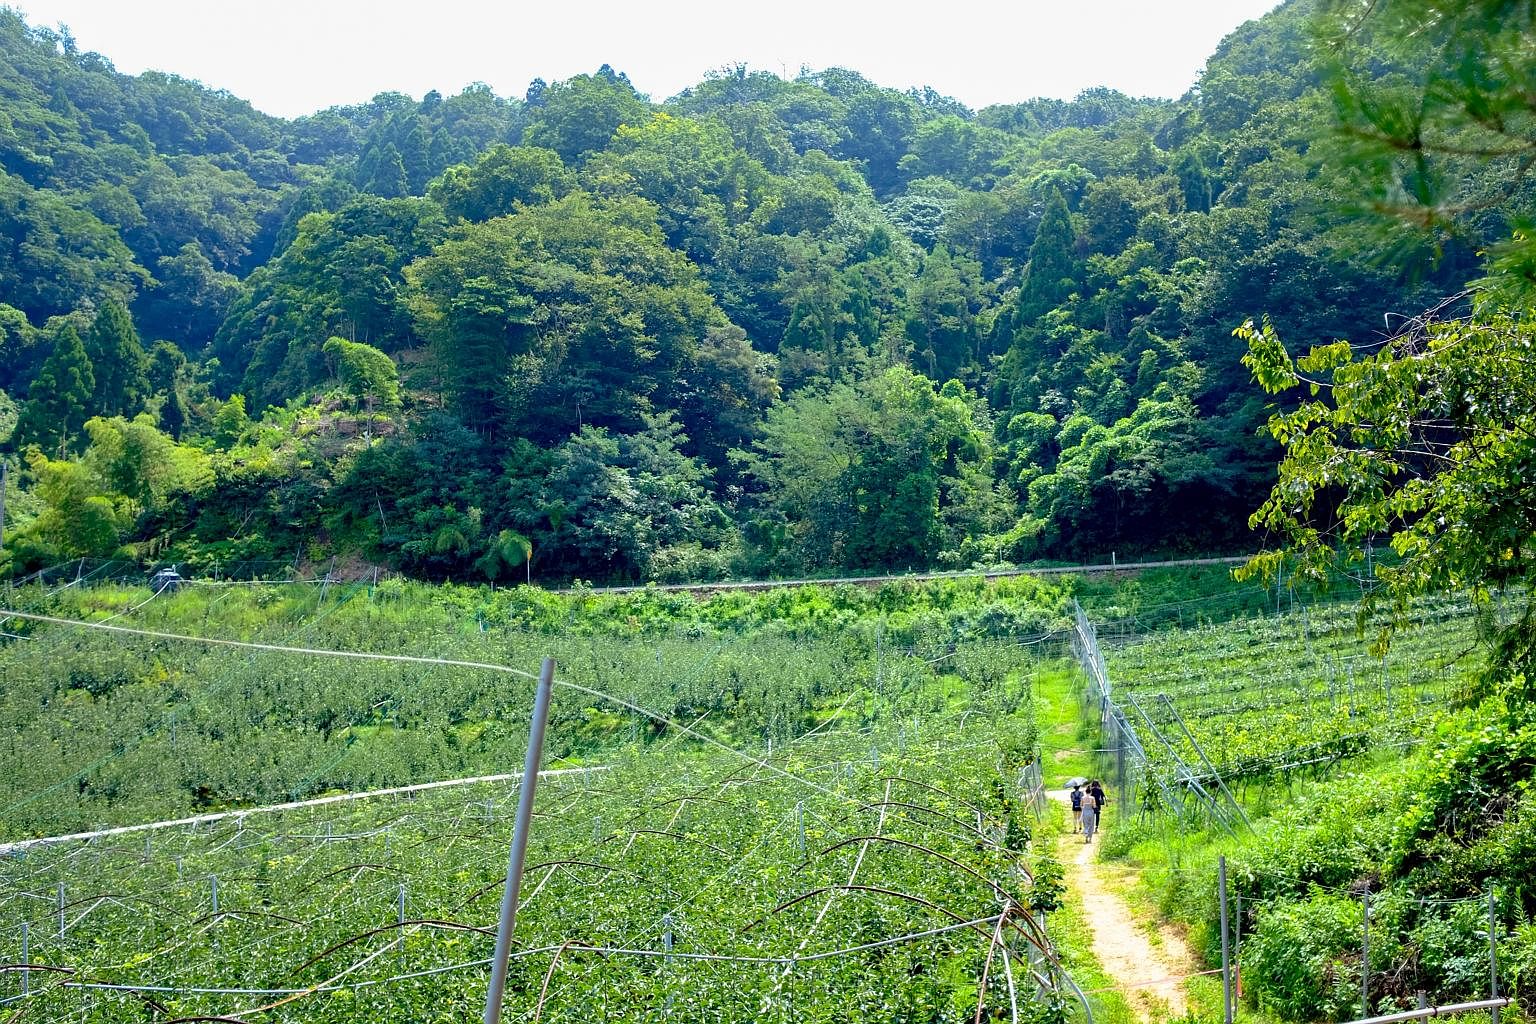 Left: When you are in Tottori prefecture, you can go pear-picking at a pear farm, which is surrounded by natural greenery. Right: It is a long and steep climb to get to Mitokusan Sanbutsuji Temple, designated a national architectural treasure, as it 